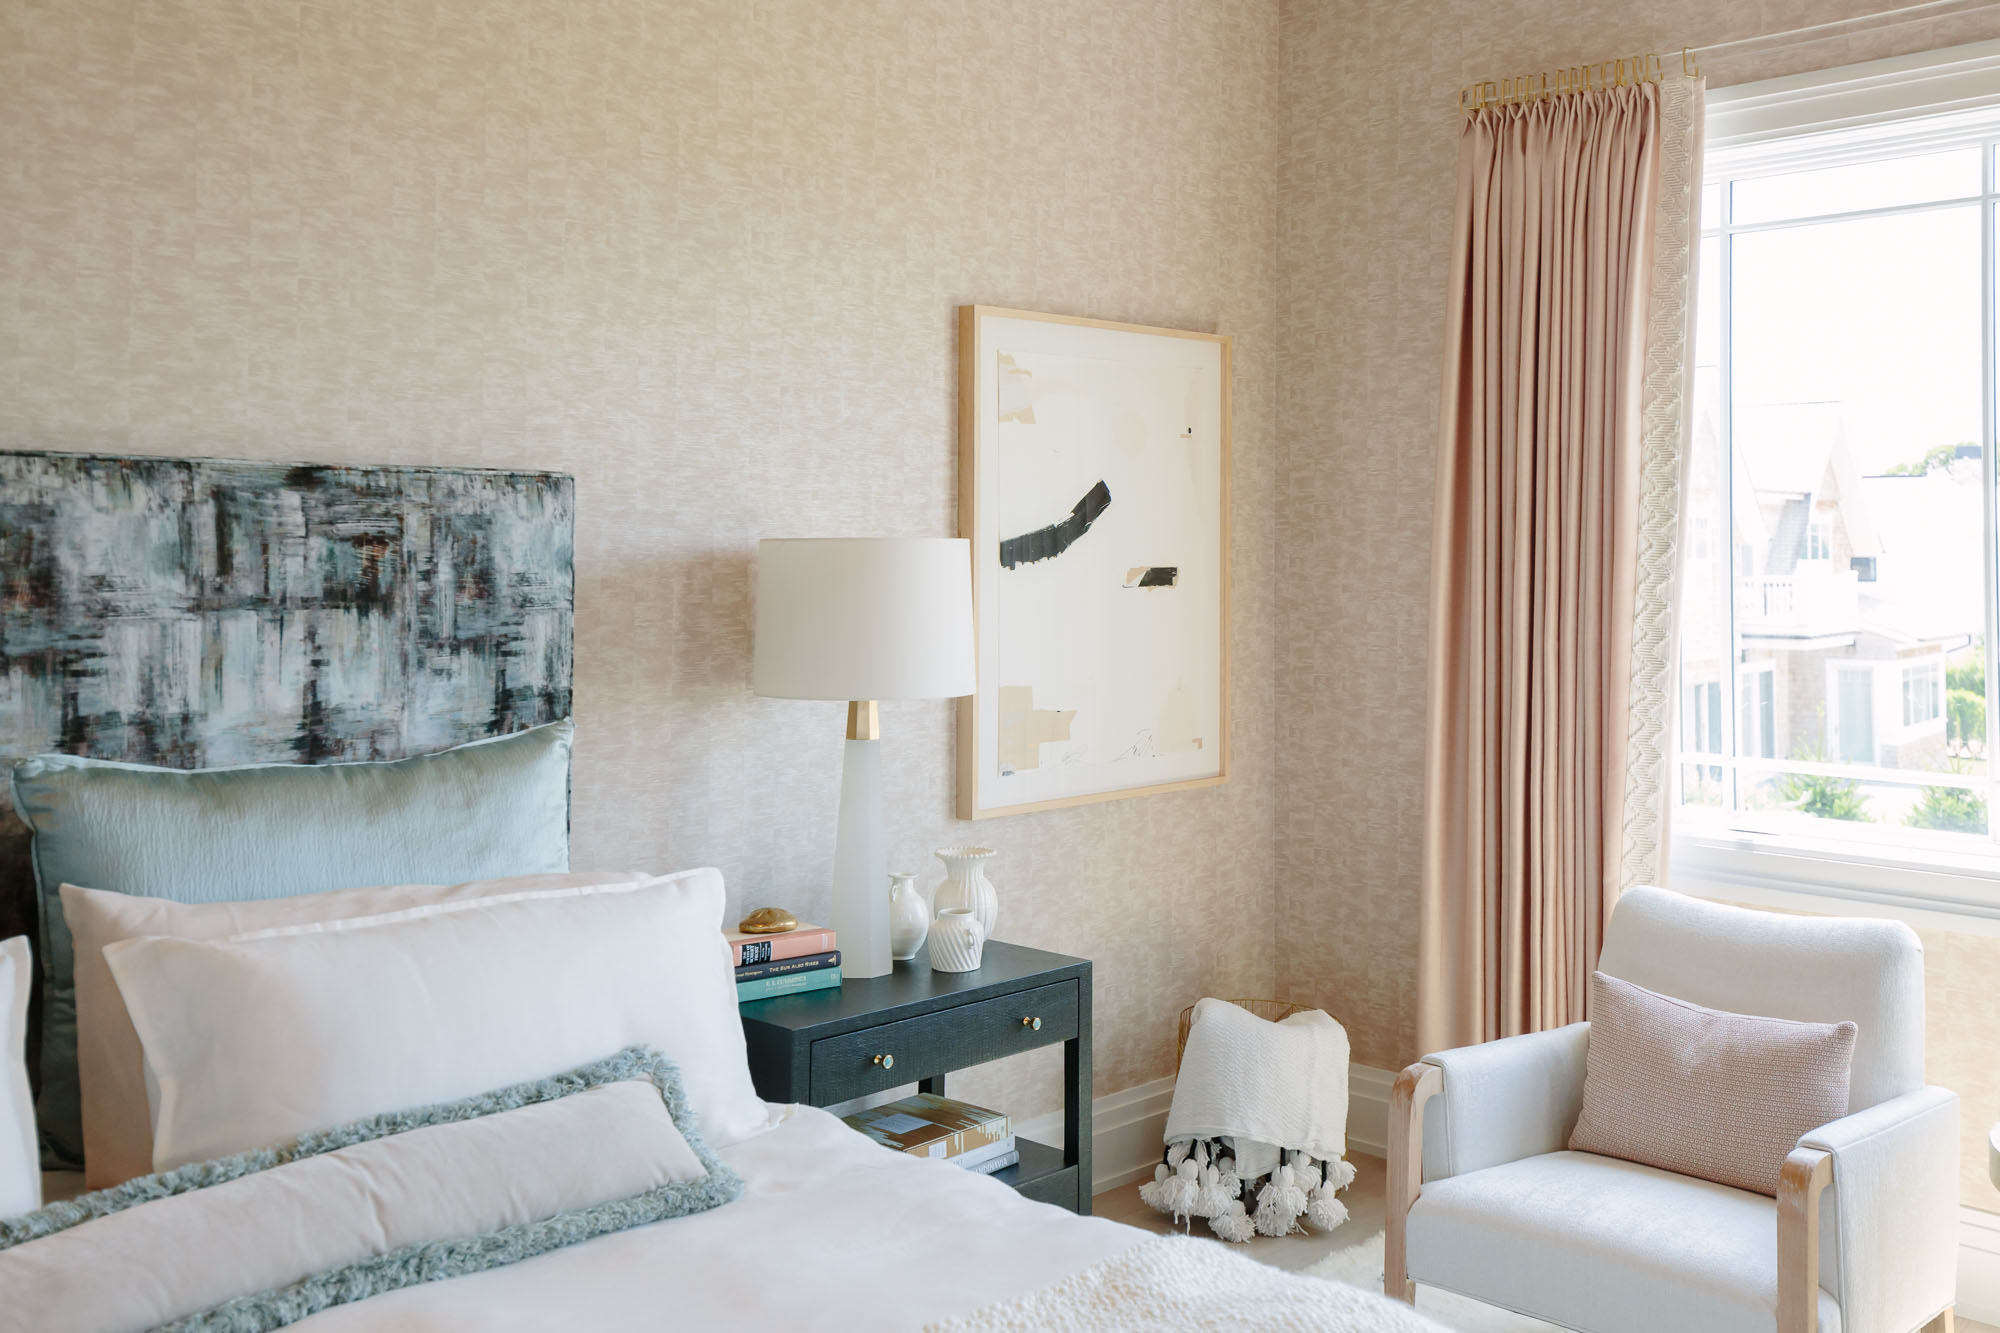 2019 Hampton Designer Showhouse featured by top US style blog, York Avenue: image of Morgan Harrison Home bedroom at the 2019 Hampton Designer Showhouse